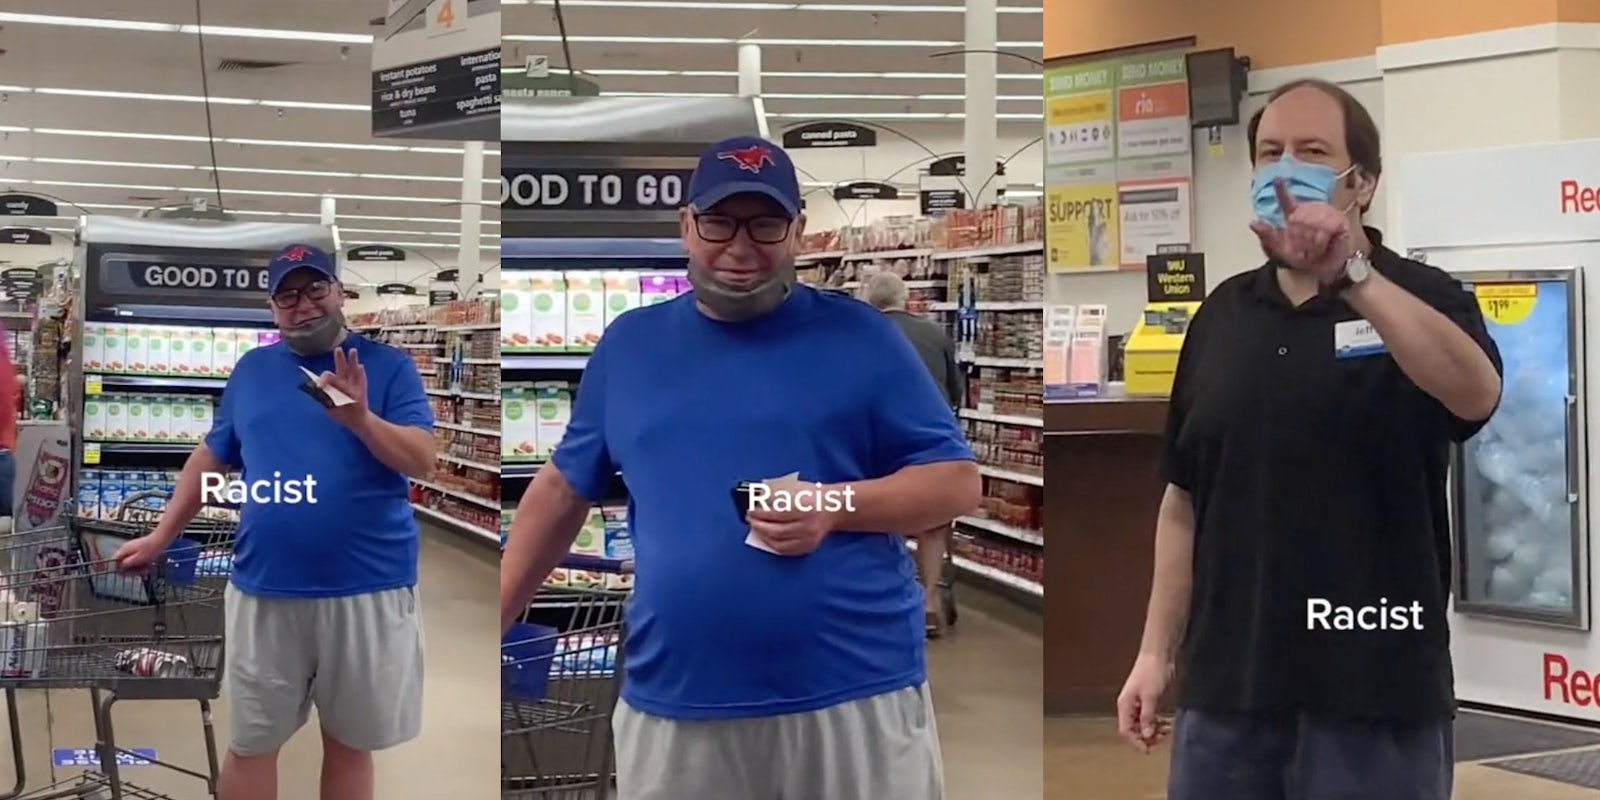 A Black Instacart shopper claimed two white men harassed her at a Kroger store